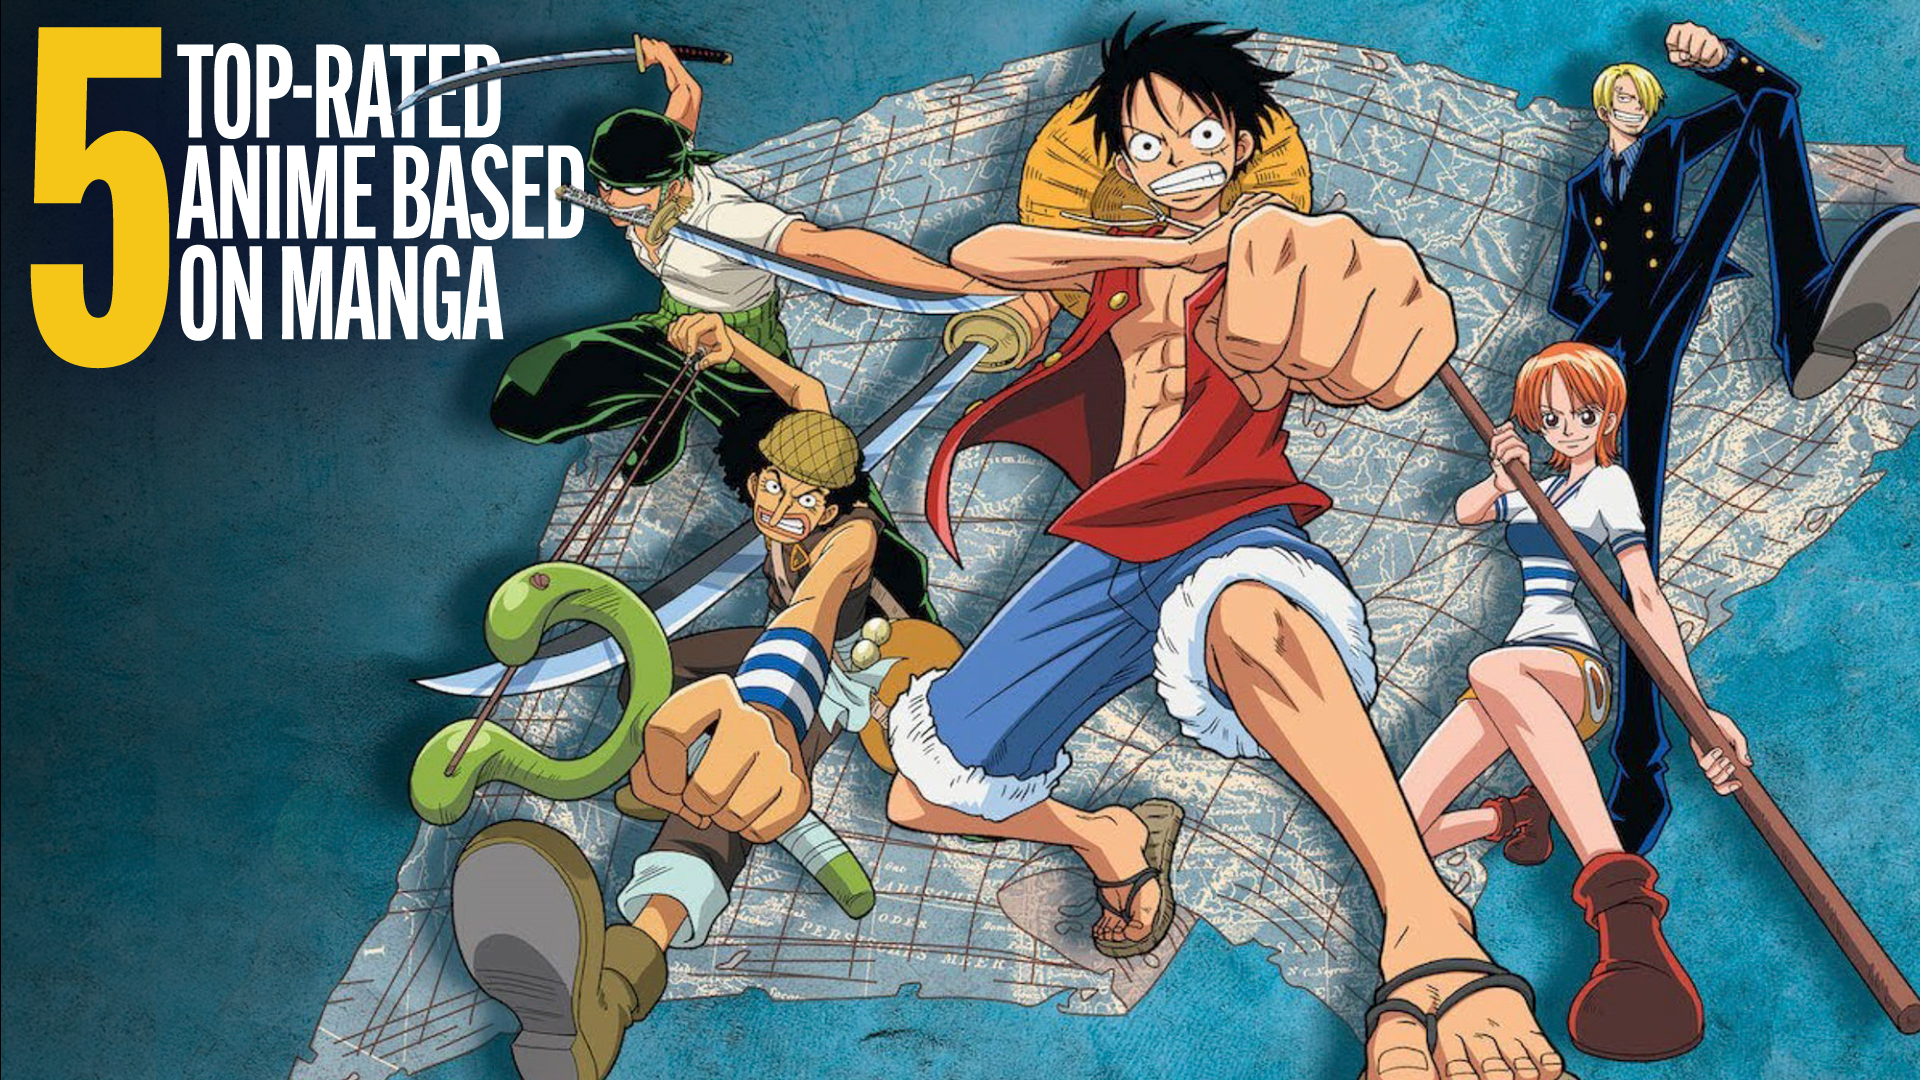 Latest One Piece Chapter Shocks Fans Ginny's True Role and Bonney's Mysterious Past Revealed